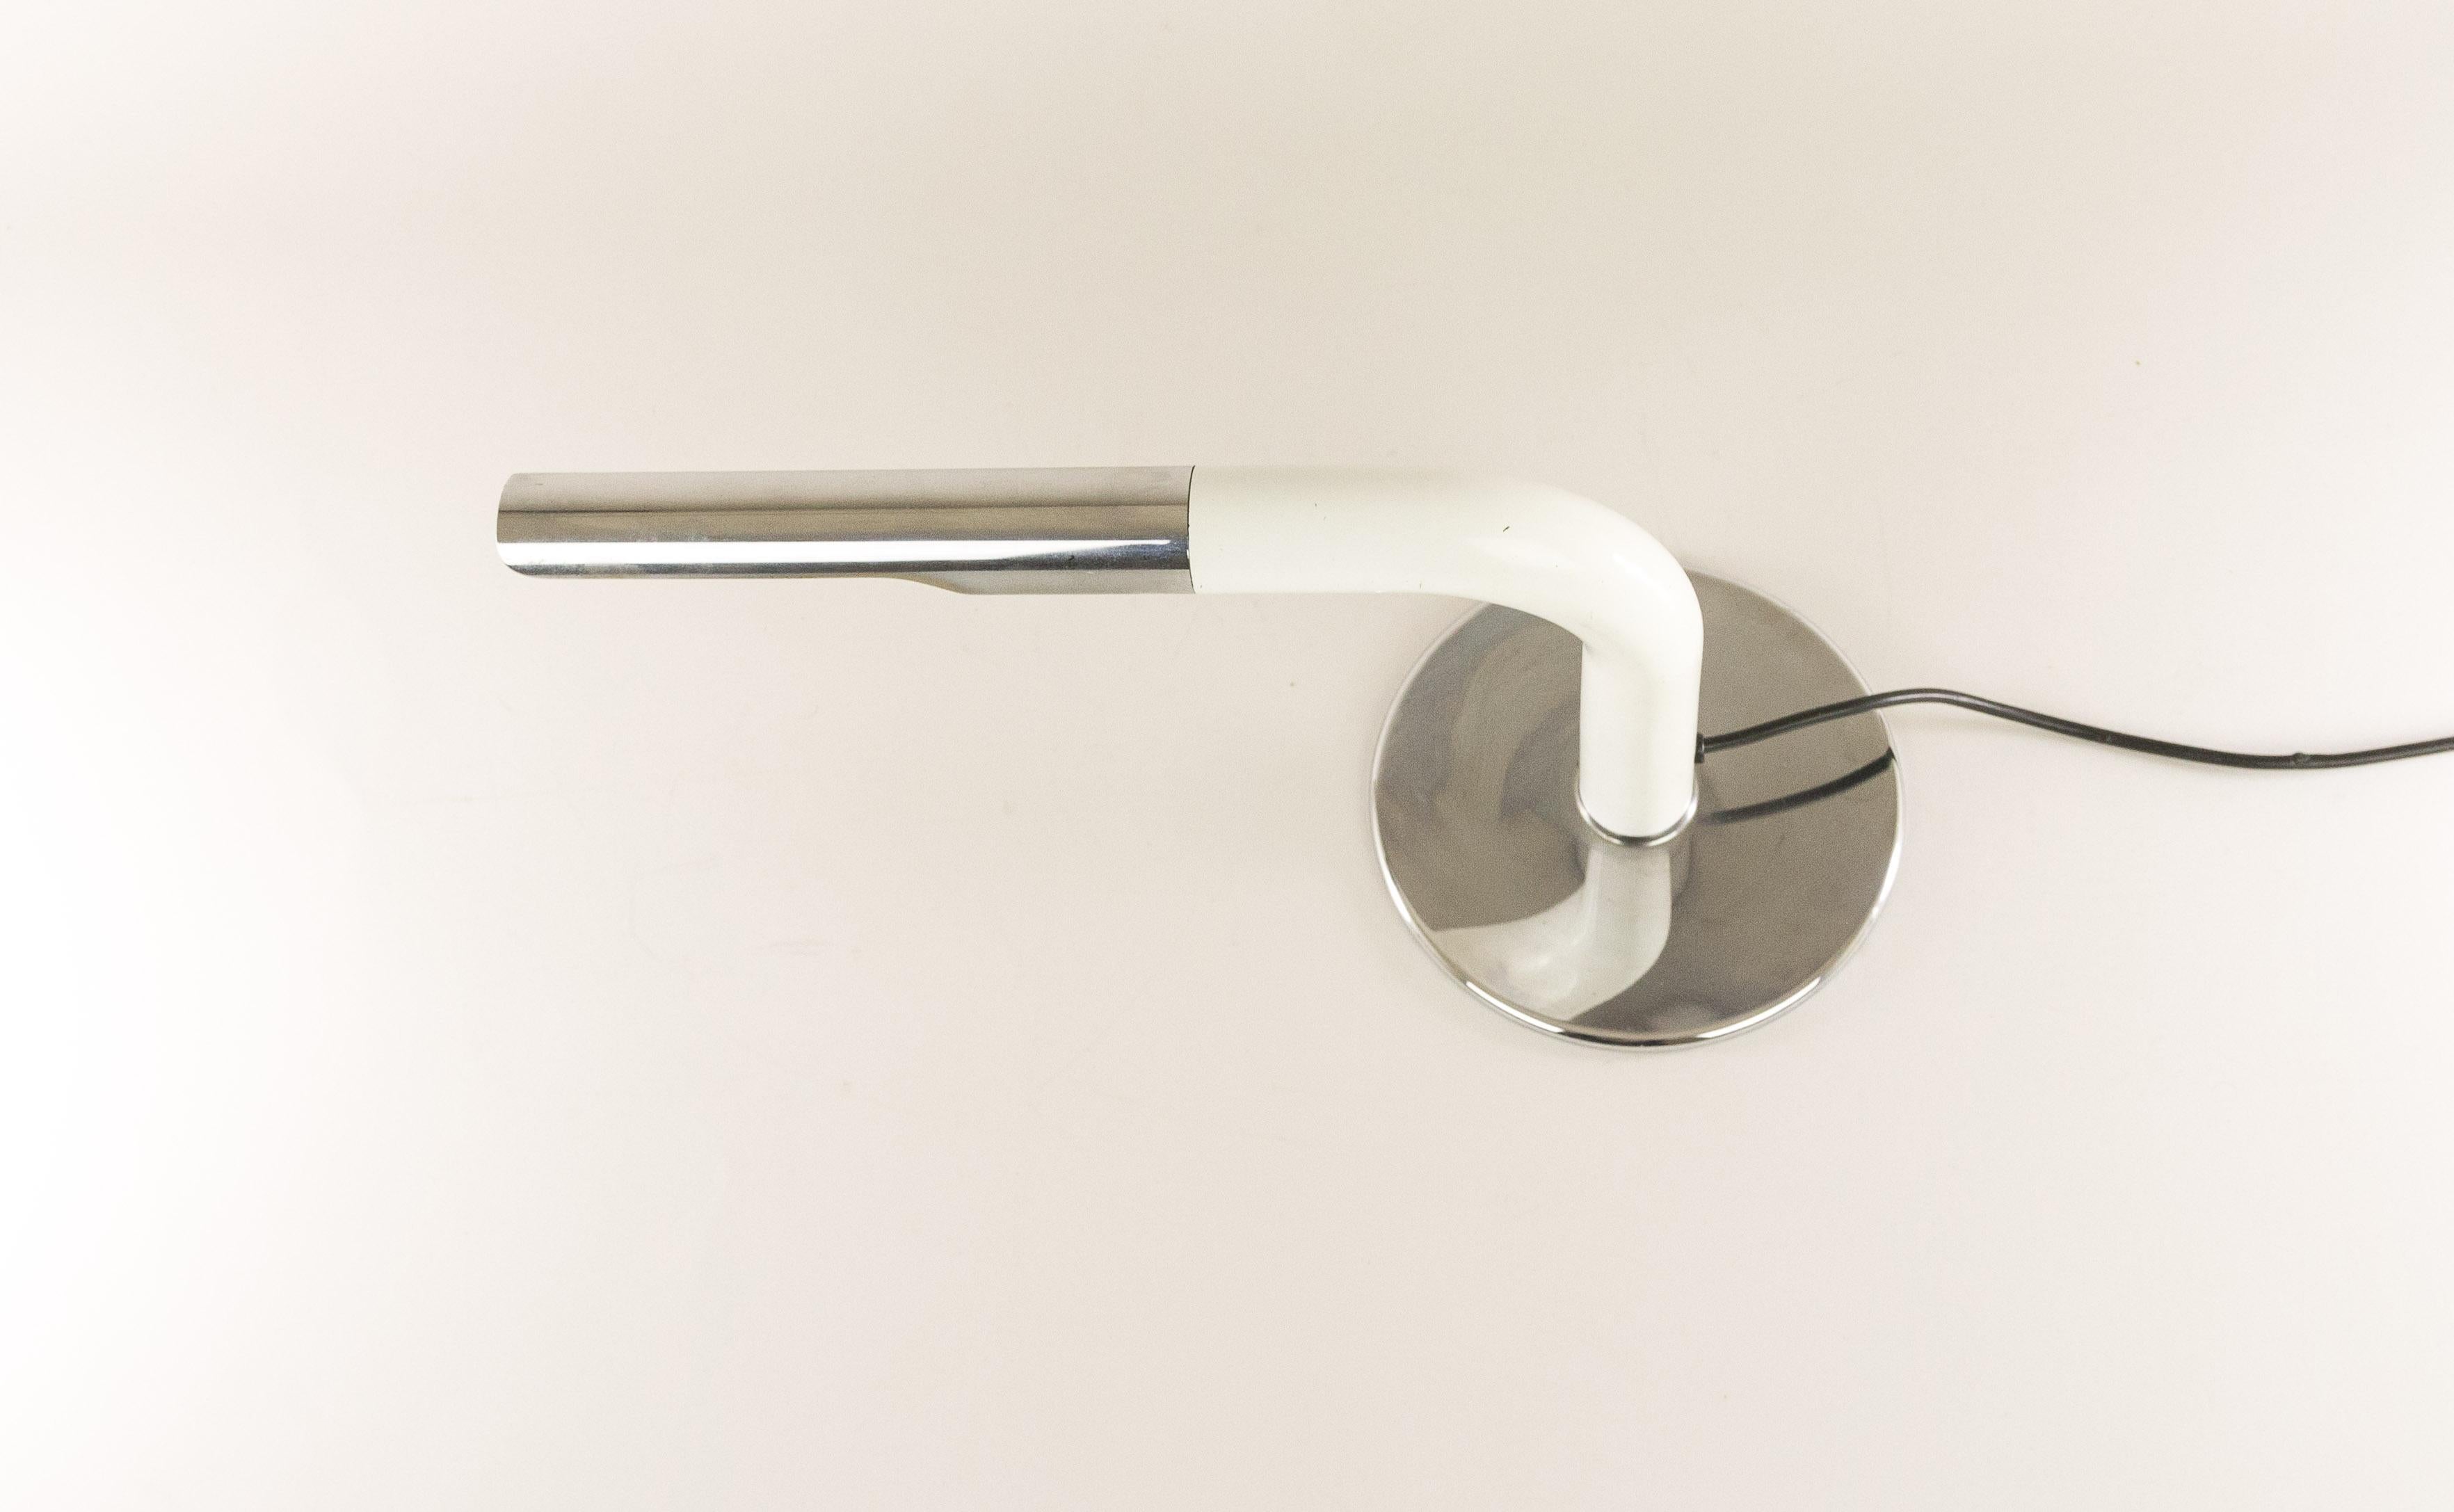 Table lamp model Gulp designed by Ingo Maurer and produced by his own company Design M.

The lamp was designed in 1969 and it is made of chrome and white lacquered metal. The condition of the lamp is good, with some minor wear consistent with age